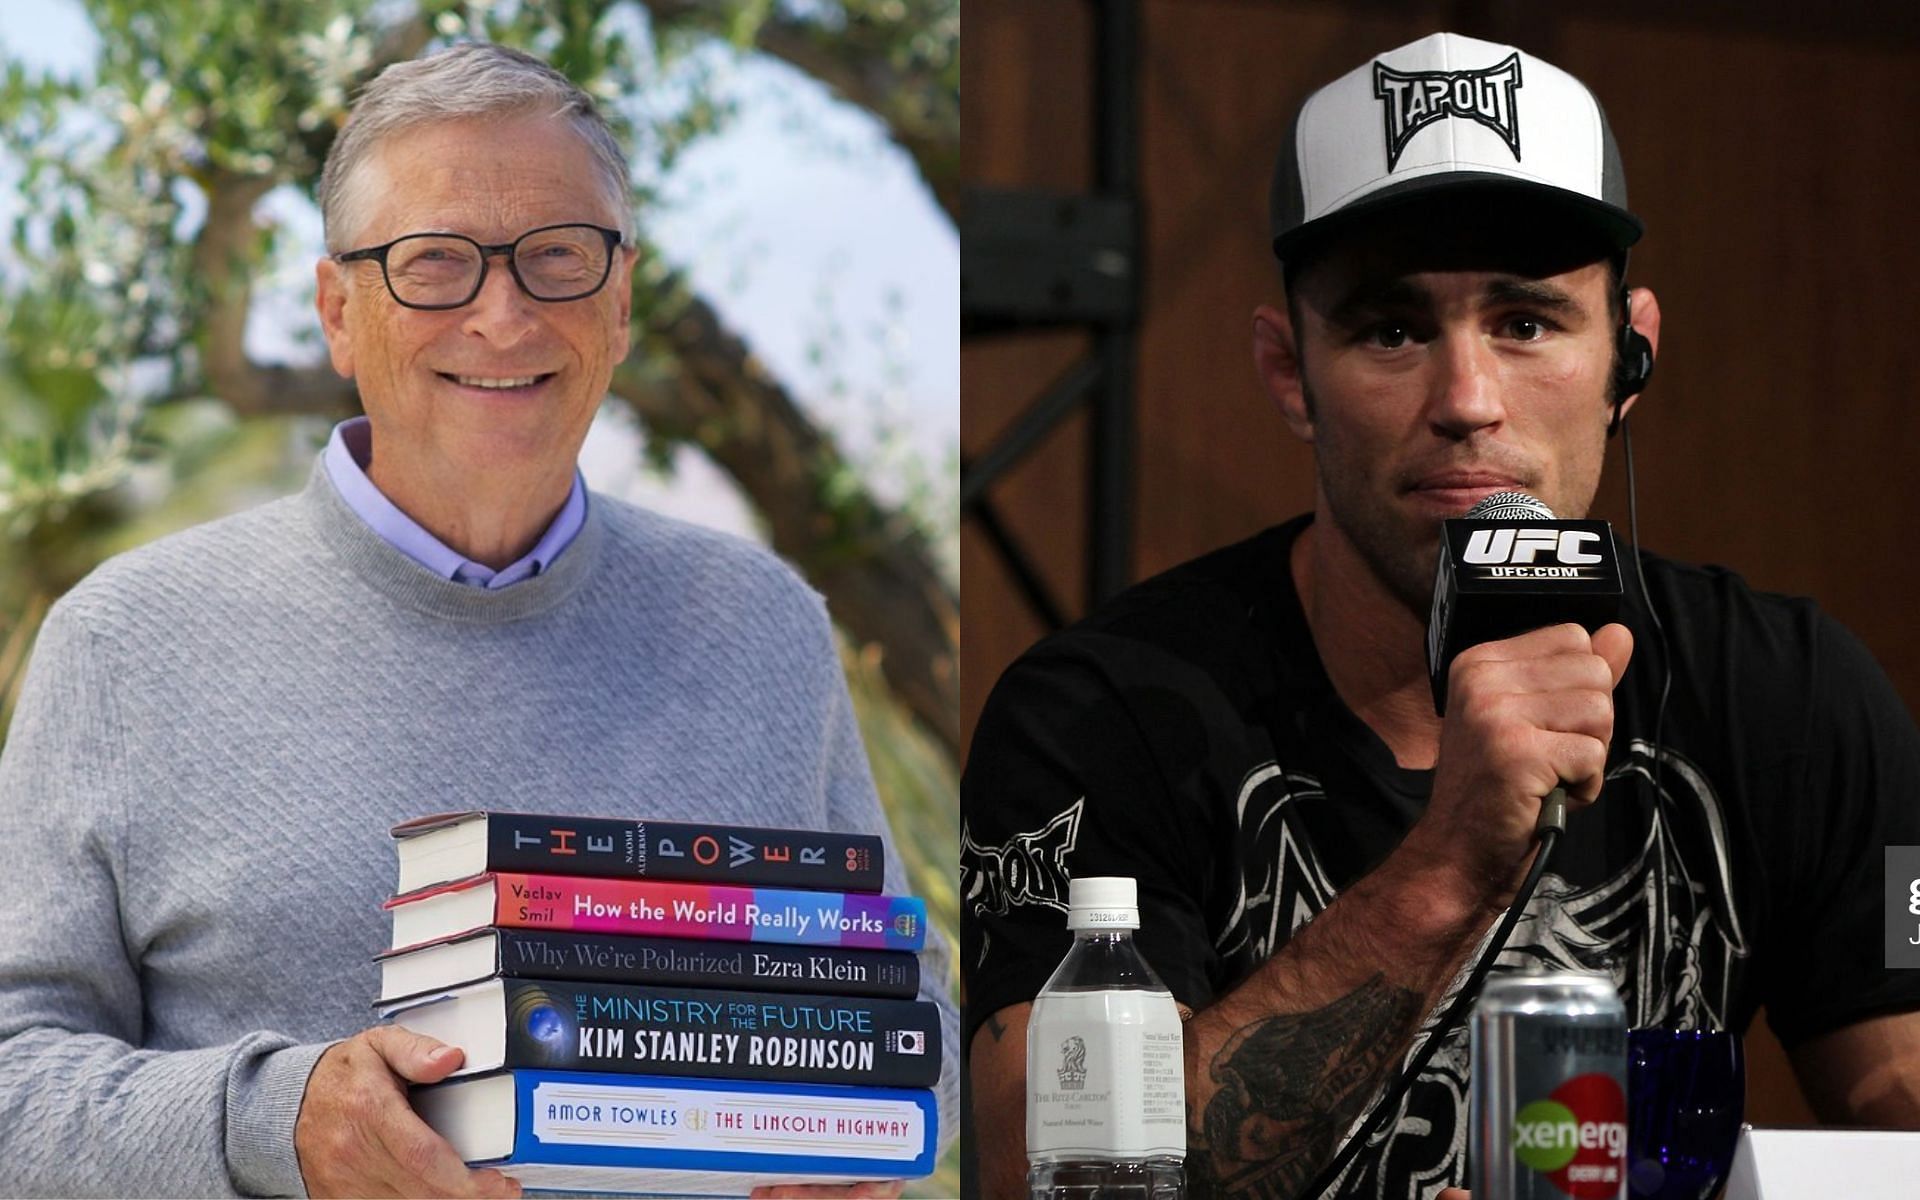 Jake Shields fires shots at Bill Gates over Epstein connection, labels him a &quot;dork&quot;